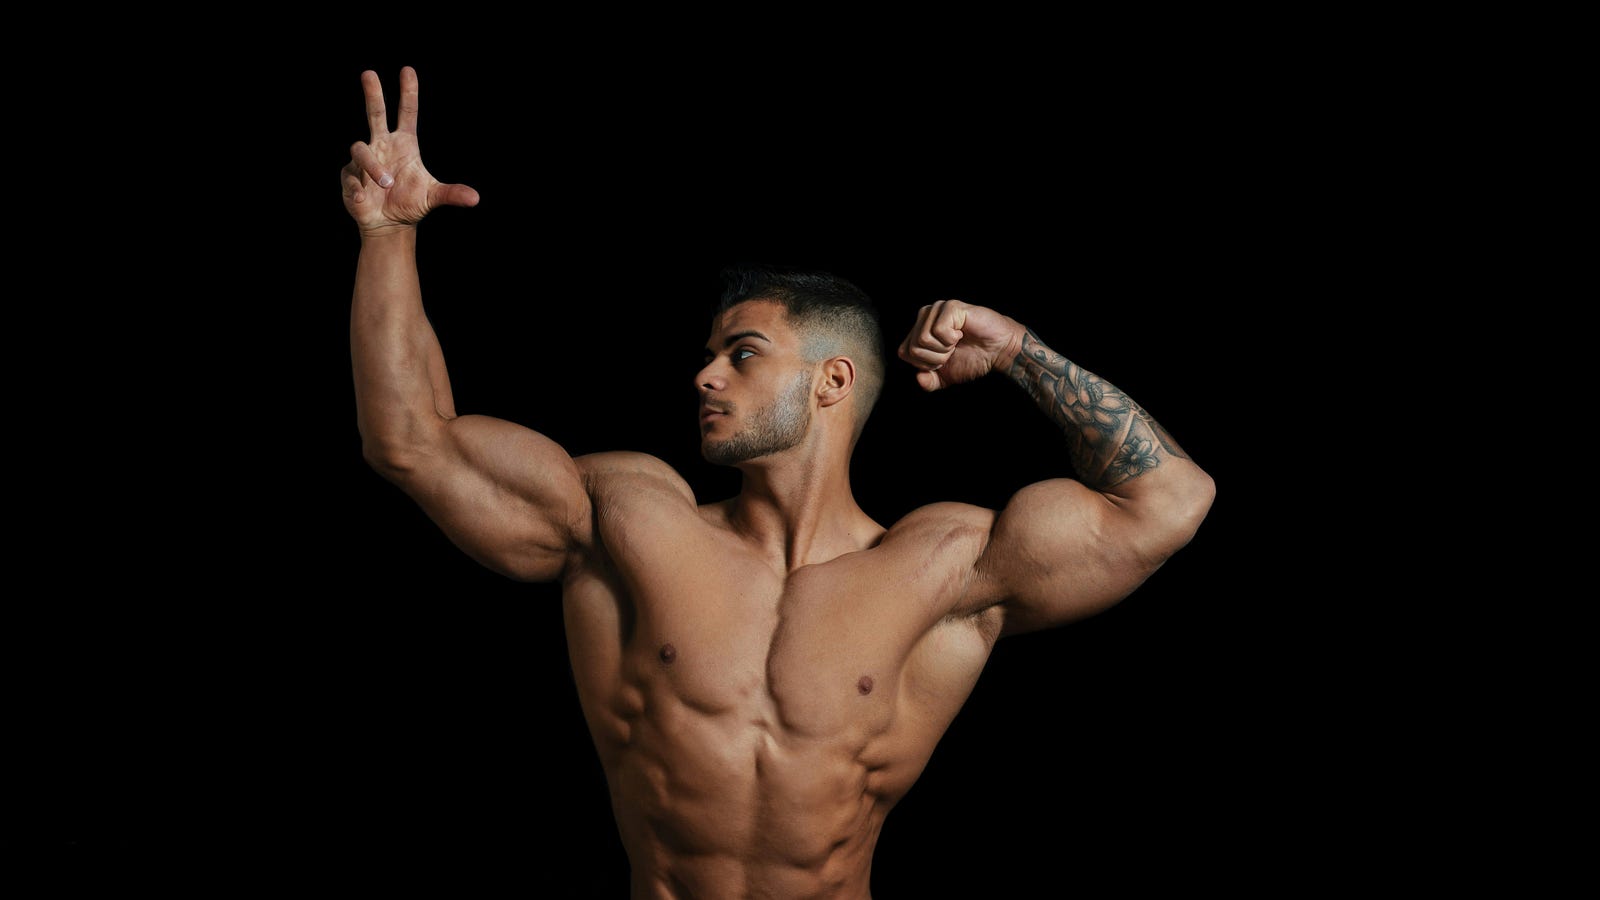 A young man poses in a body builder “hero” position.